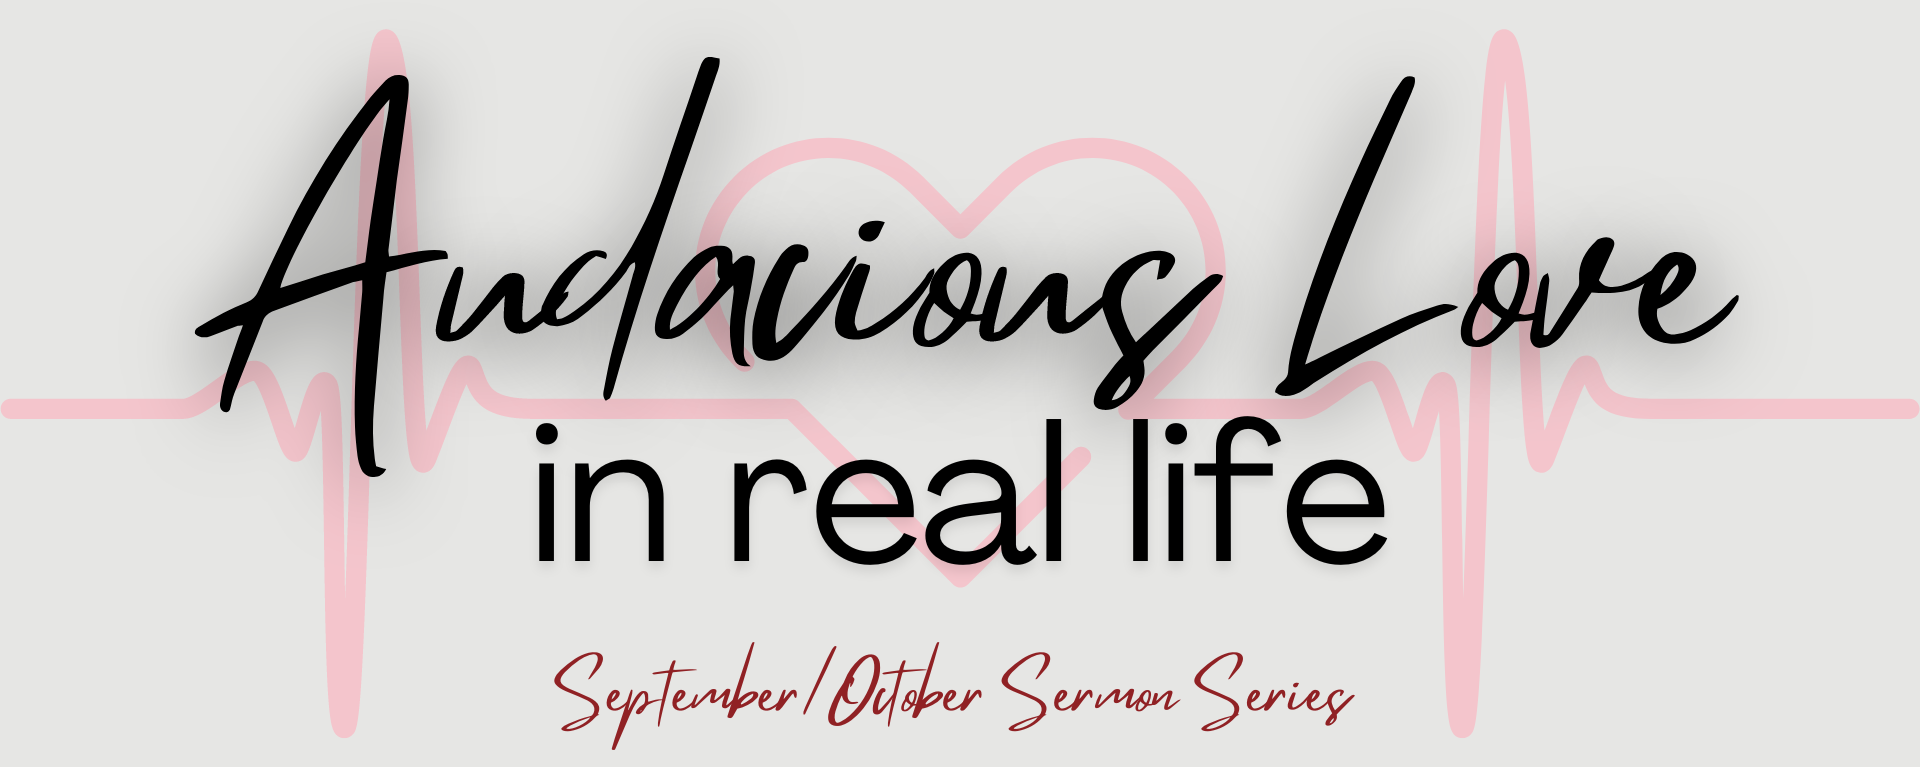 Audacious Love in Real Life Rely on God